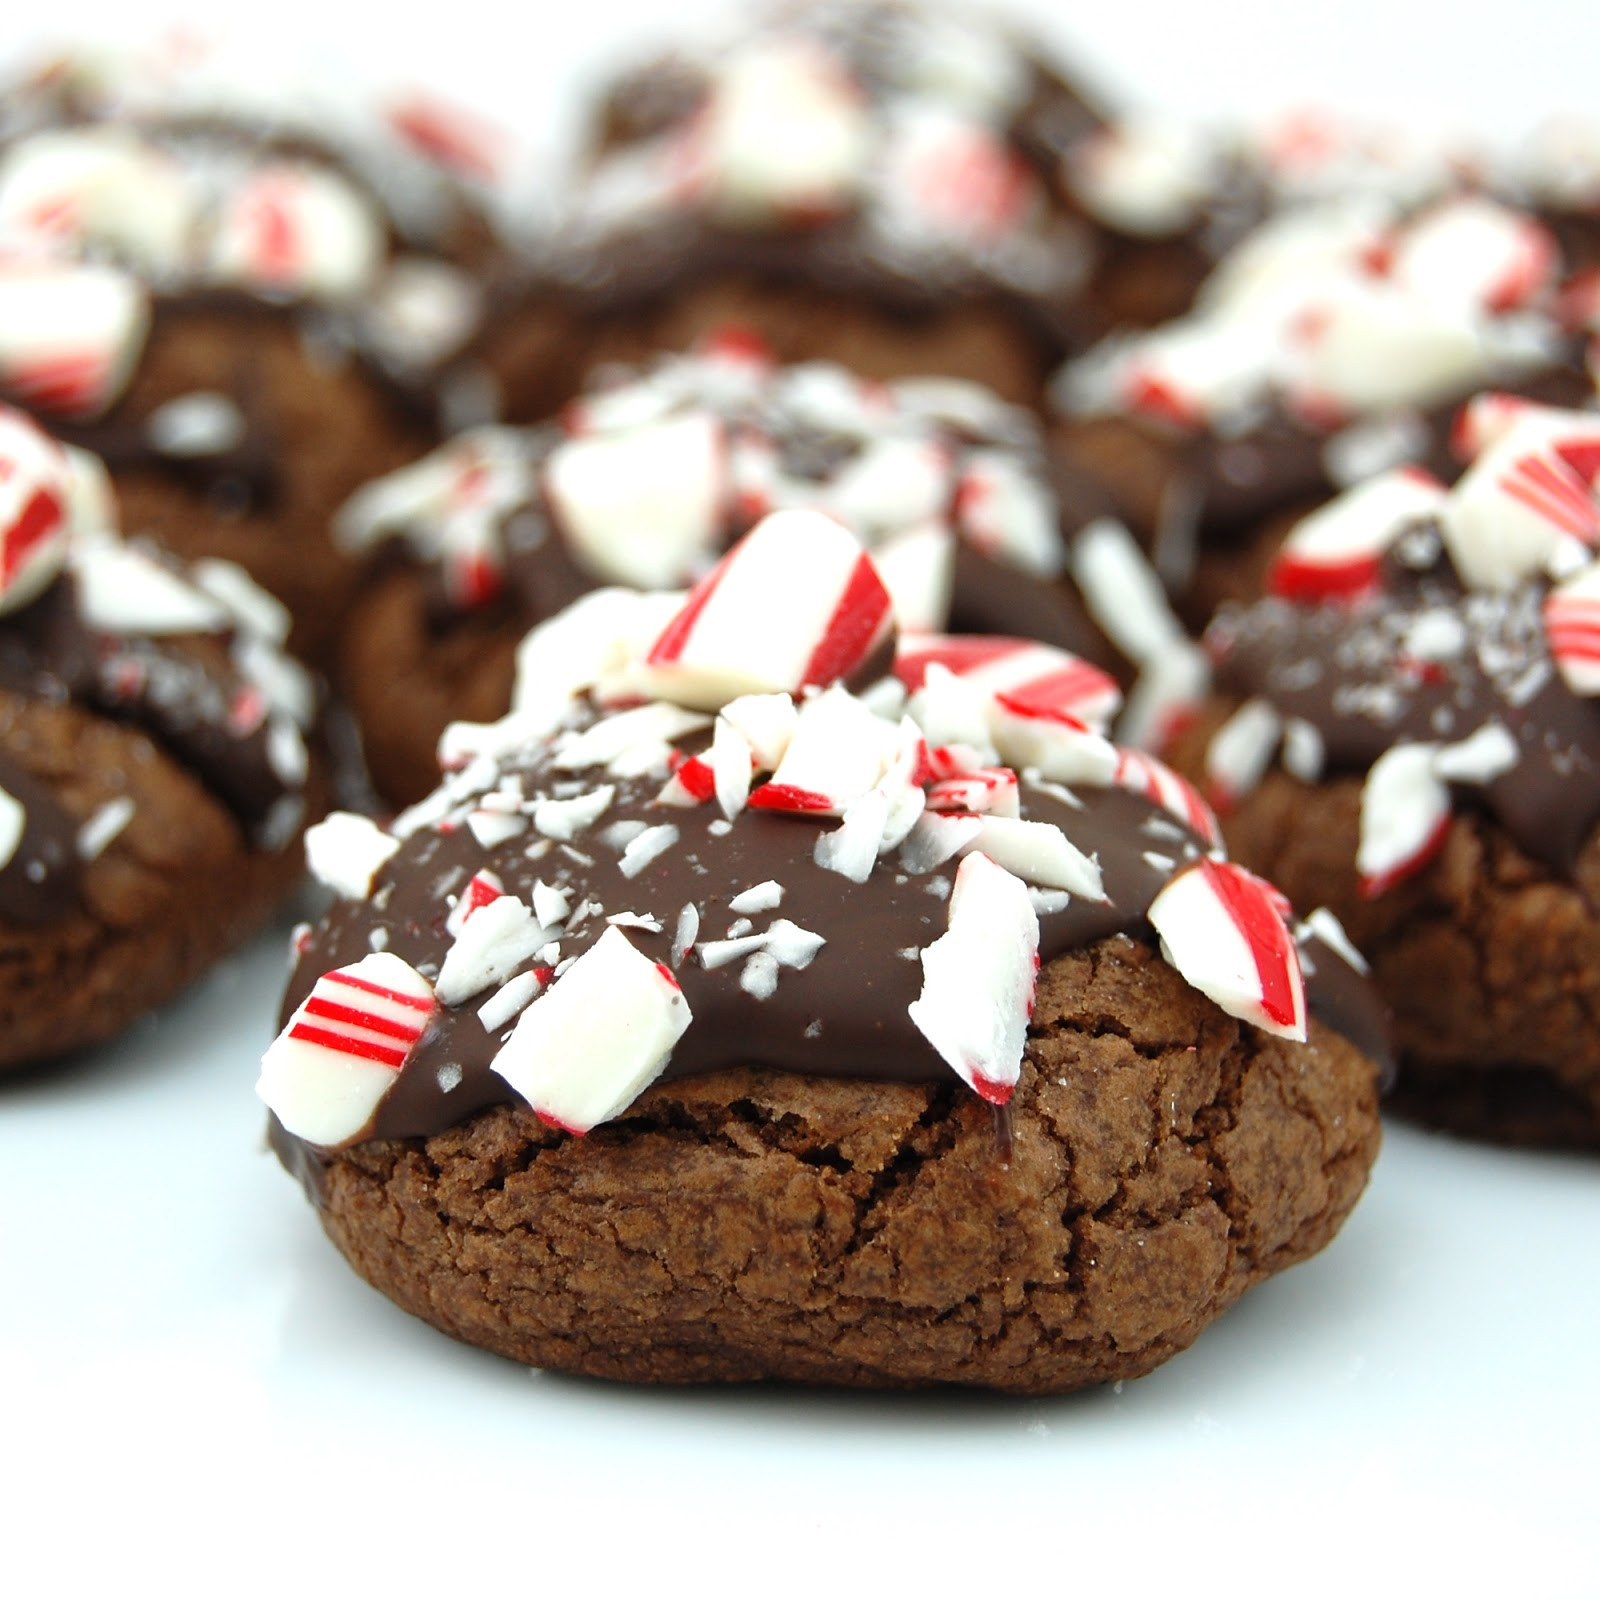 Chocolate Peppermint Christmas Cookies
 Lynda Jane Cakes Double Chocolate Peppermint Crunch Cookies